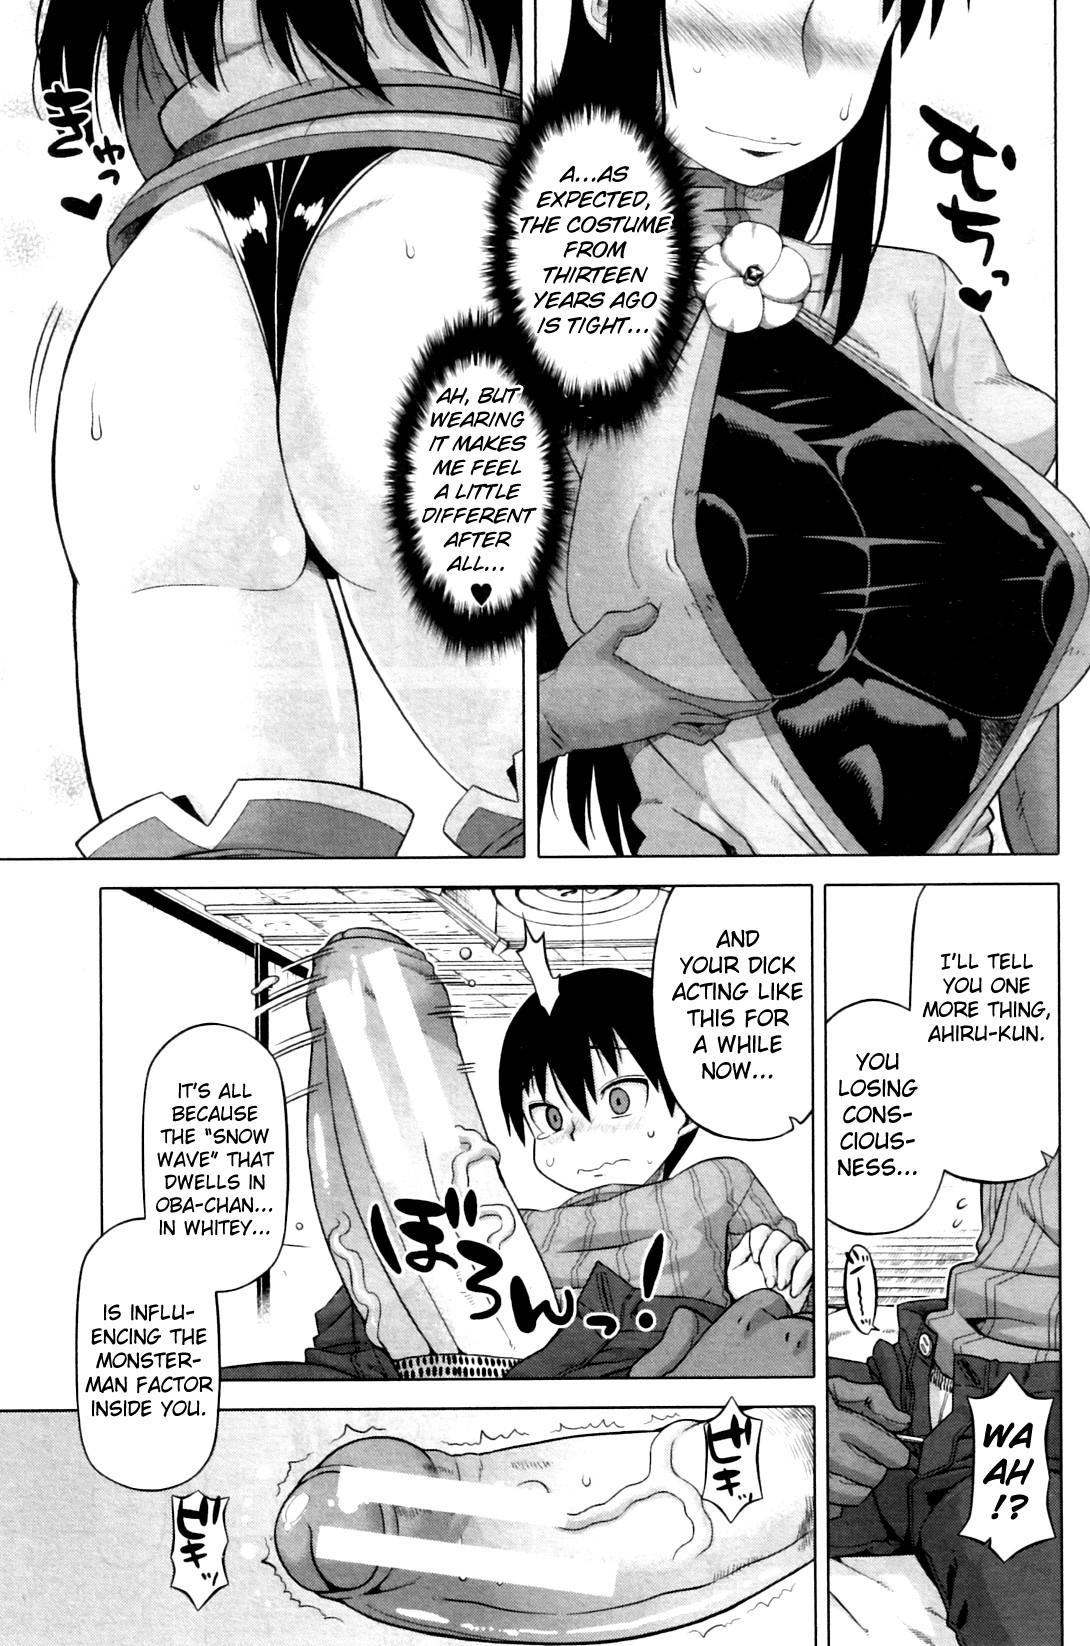 Erotica [Takatu] Snow Knight Whitey (30) Ch. 1-5 [Eng] {doujin-moe.us} Foursome - Page 9